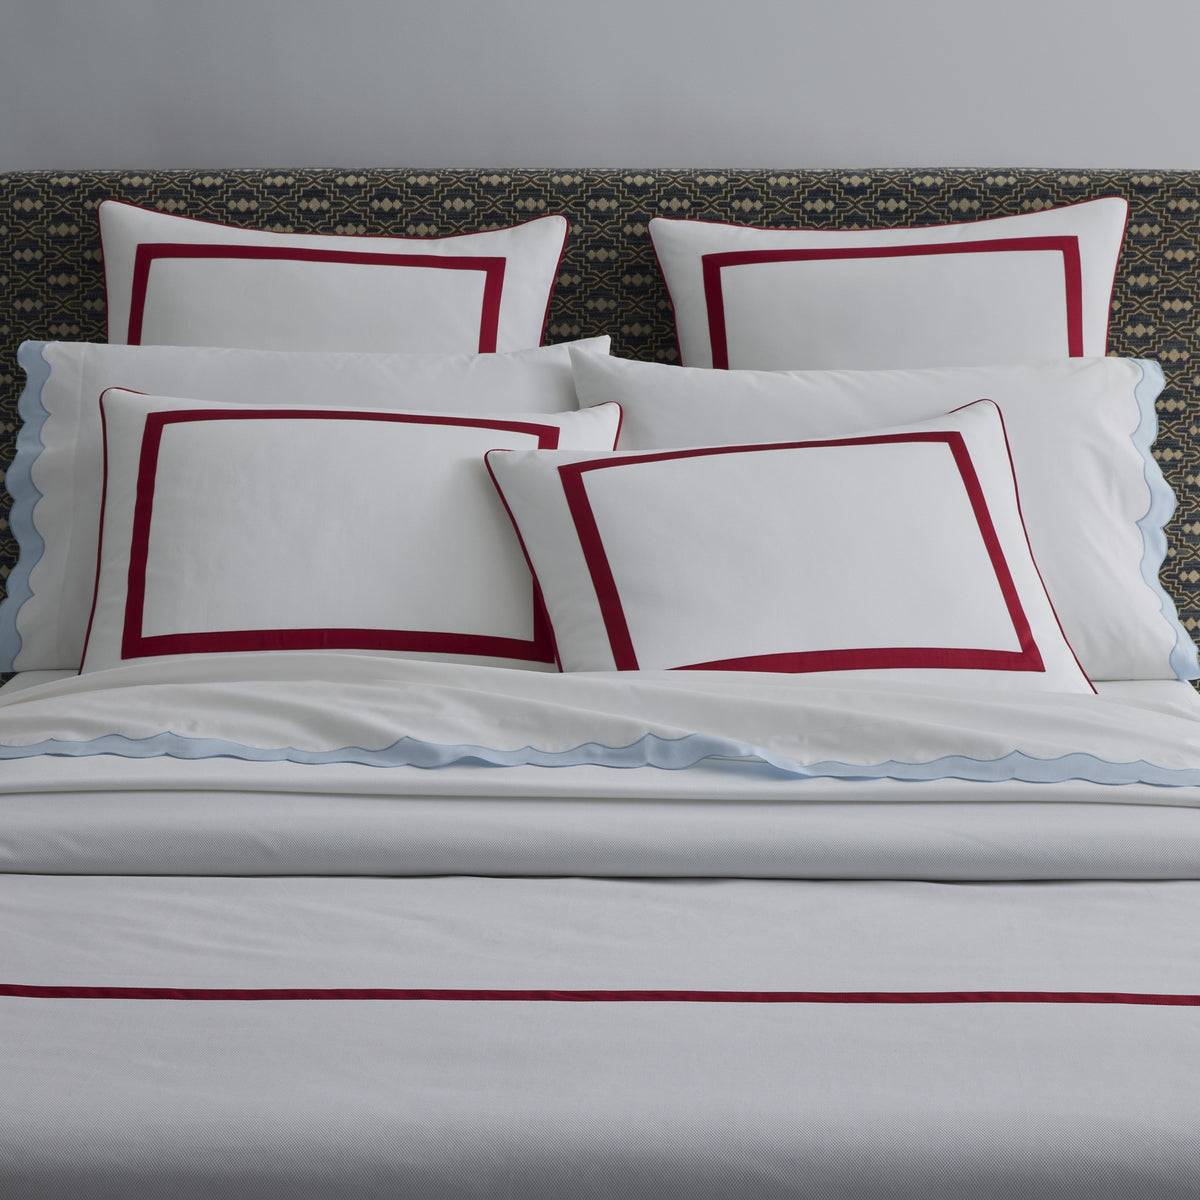 Detail Image of Matouk Louise Pique Bedding in Scarlet Color